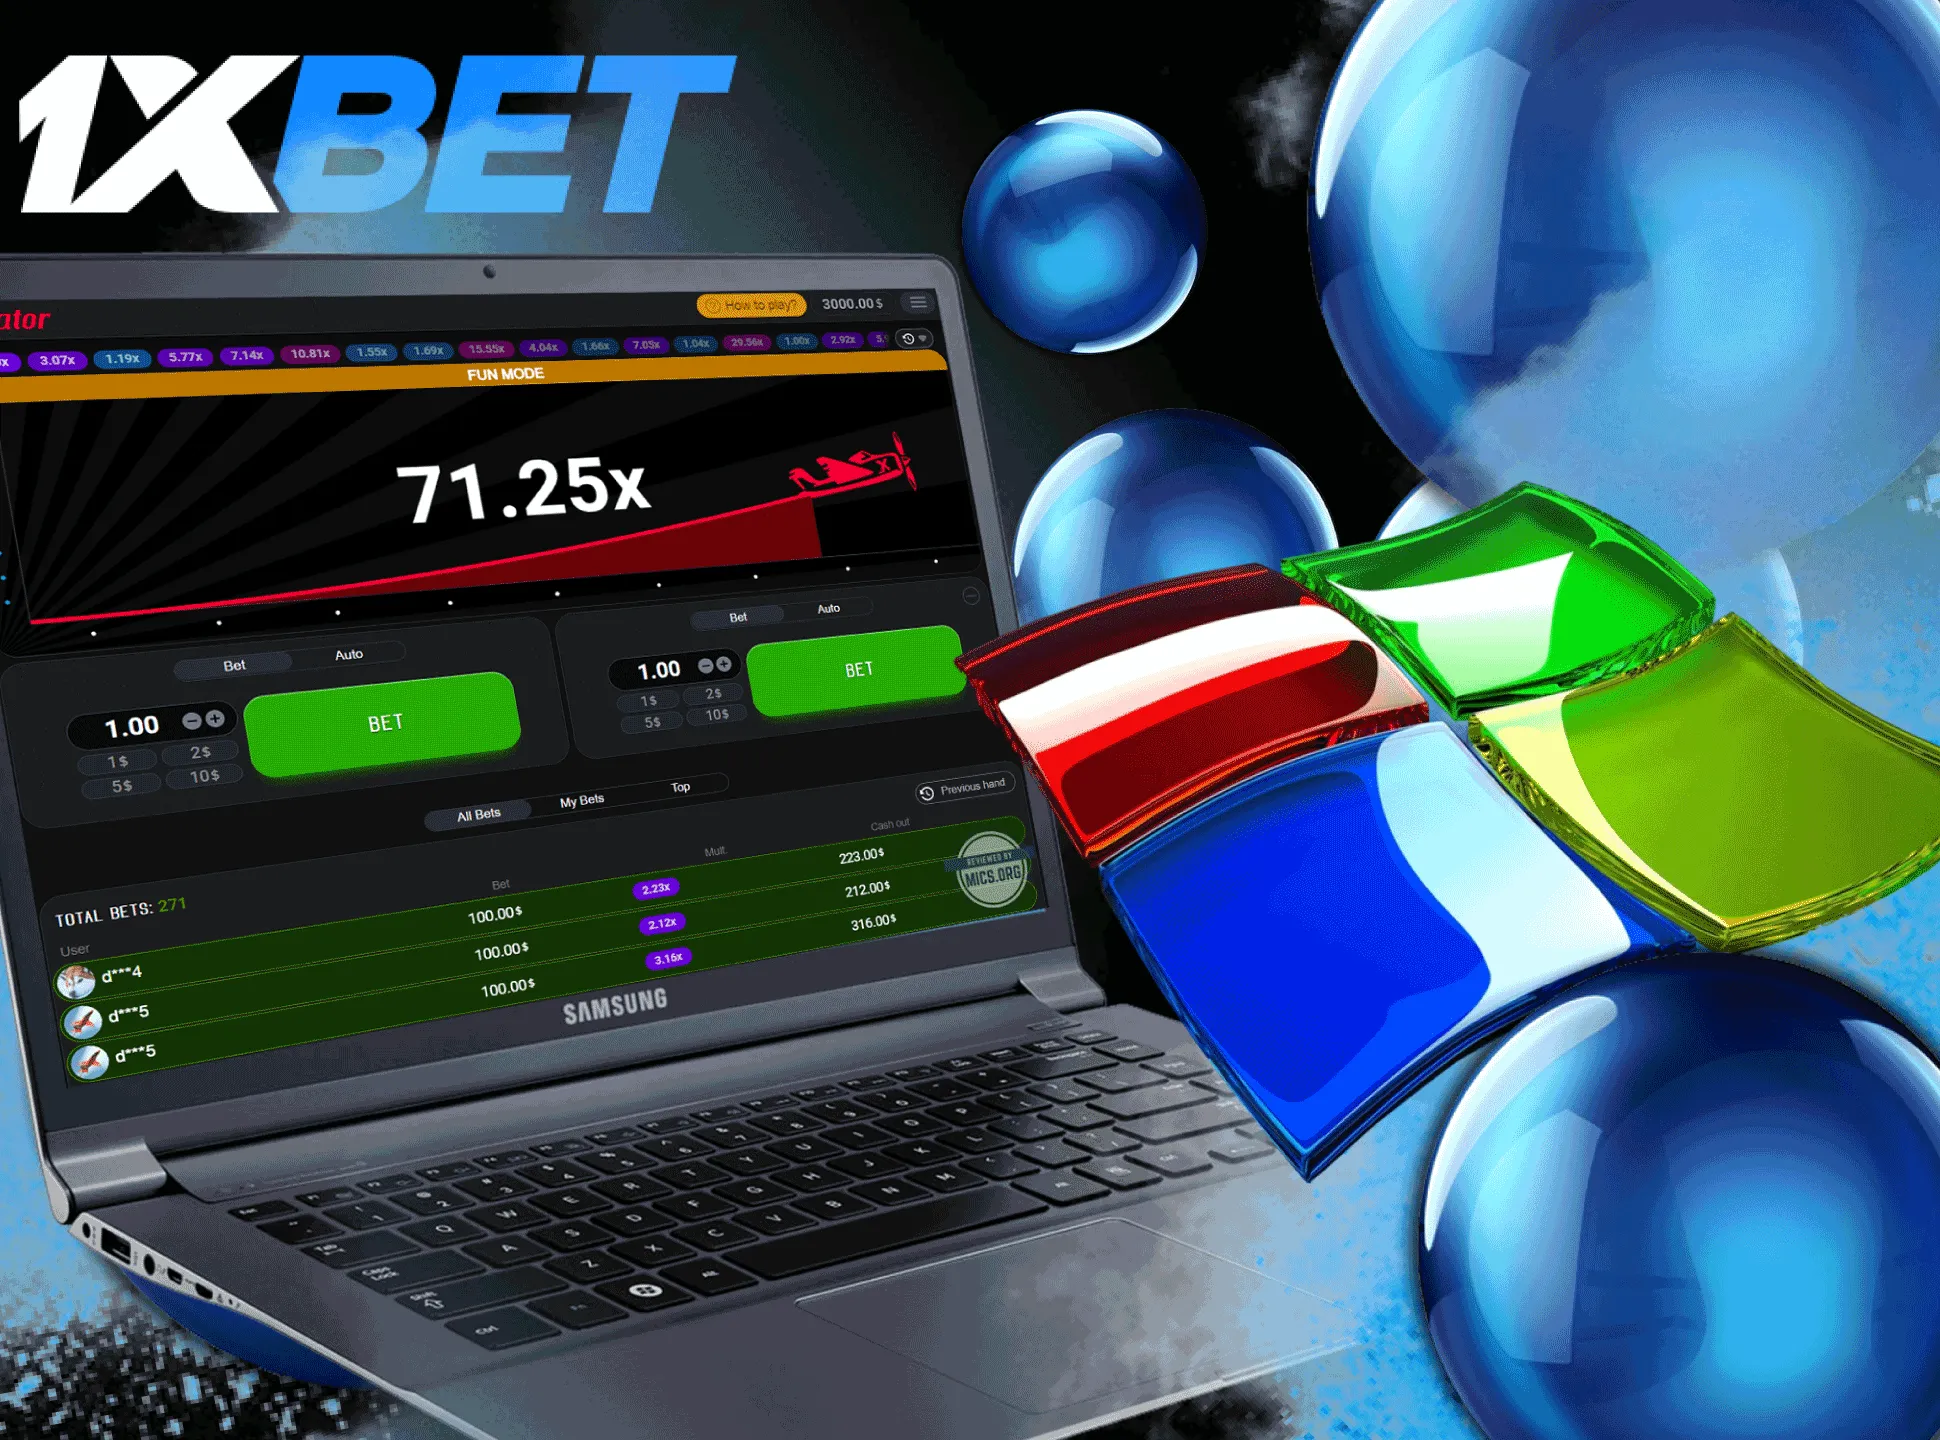 You can also install the 1xbet desktop app for your PC or laptop.